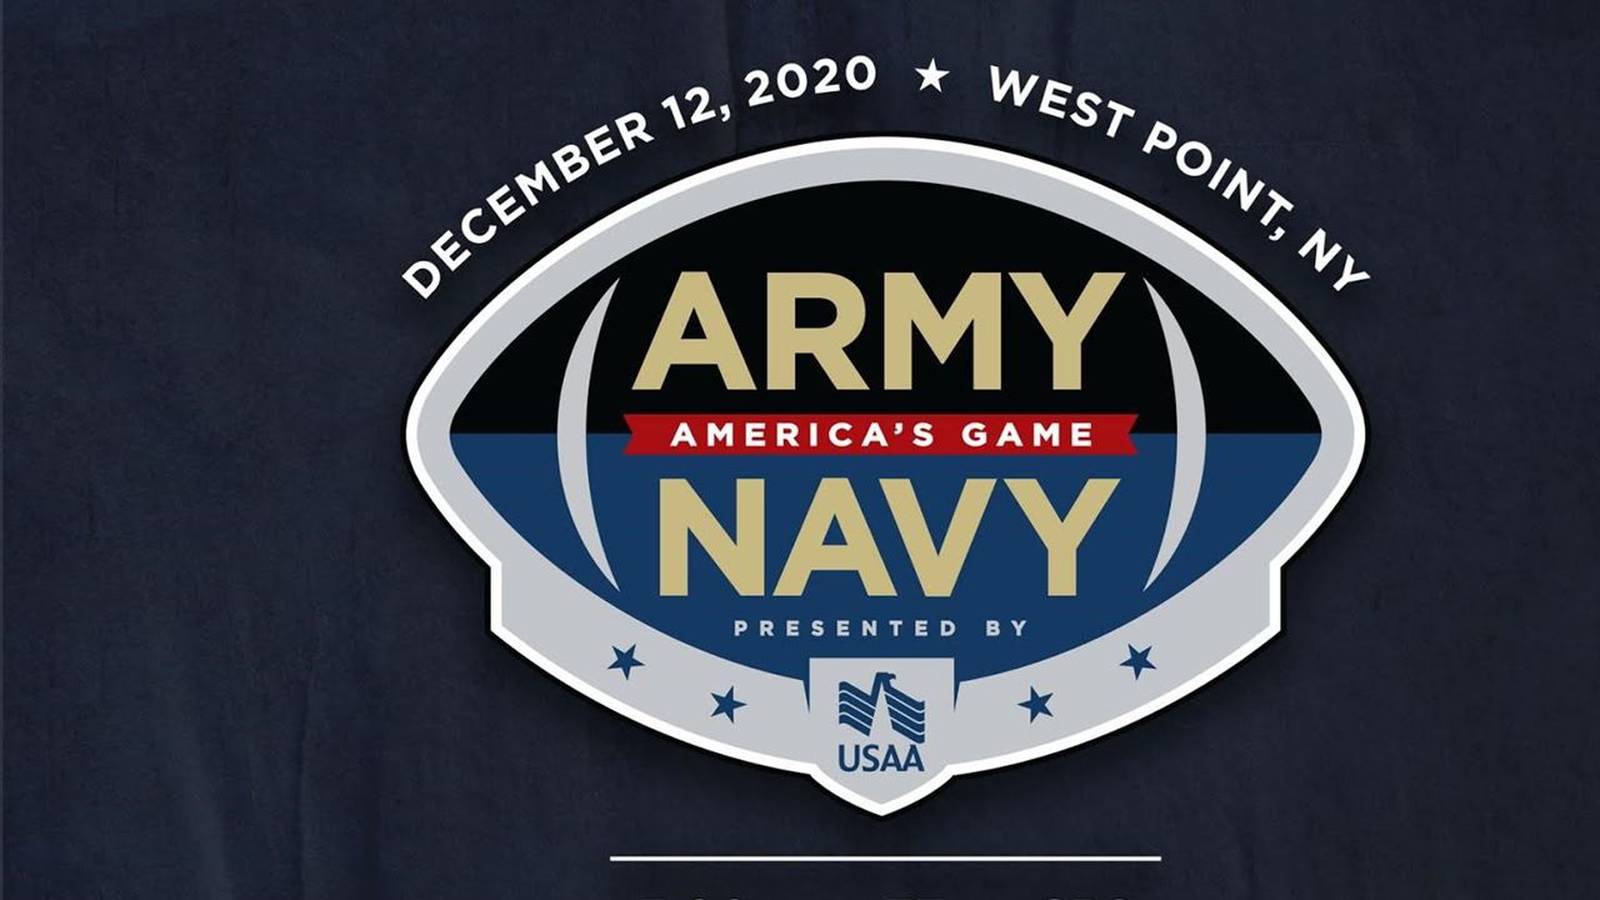 Coronavirus ArmyNavy football game to be held at West Point for first